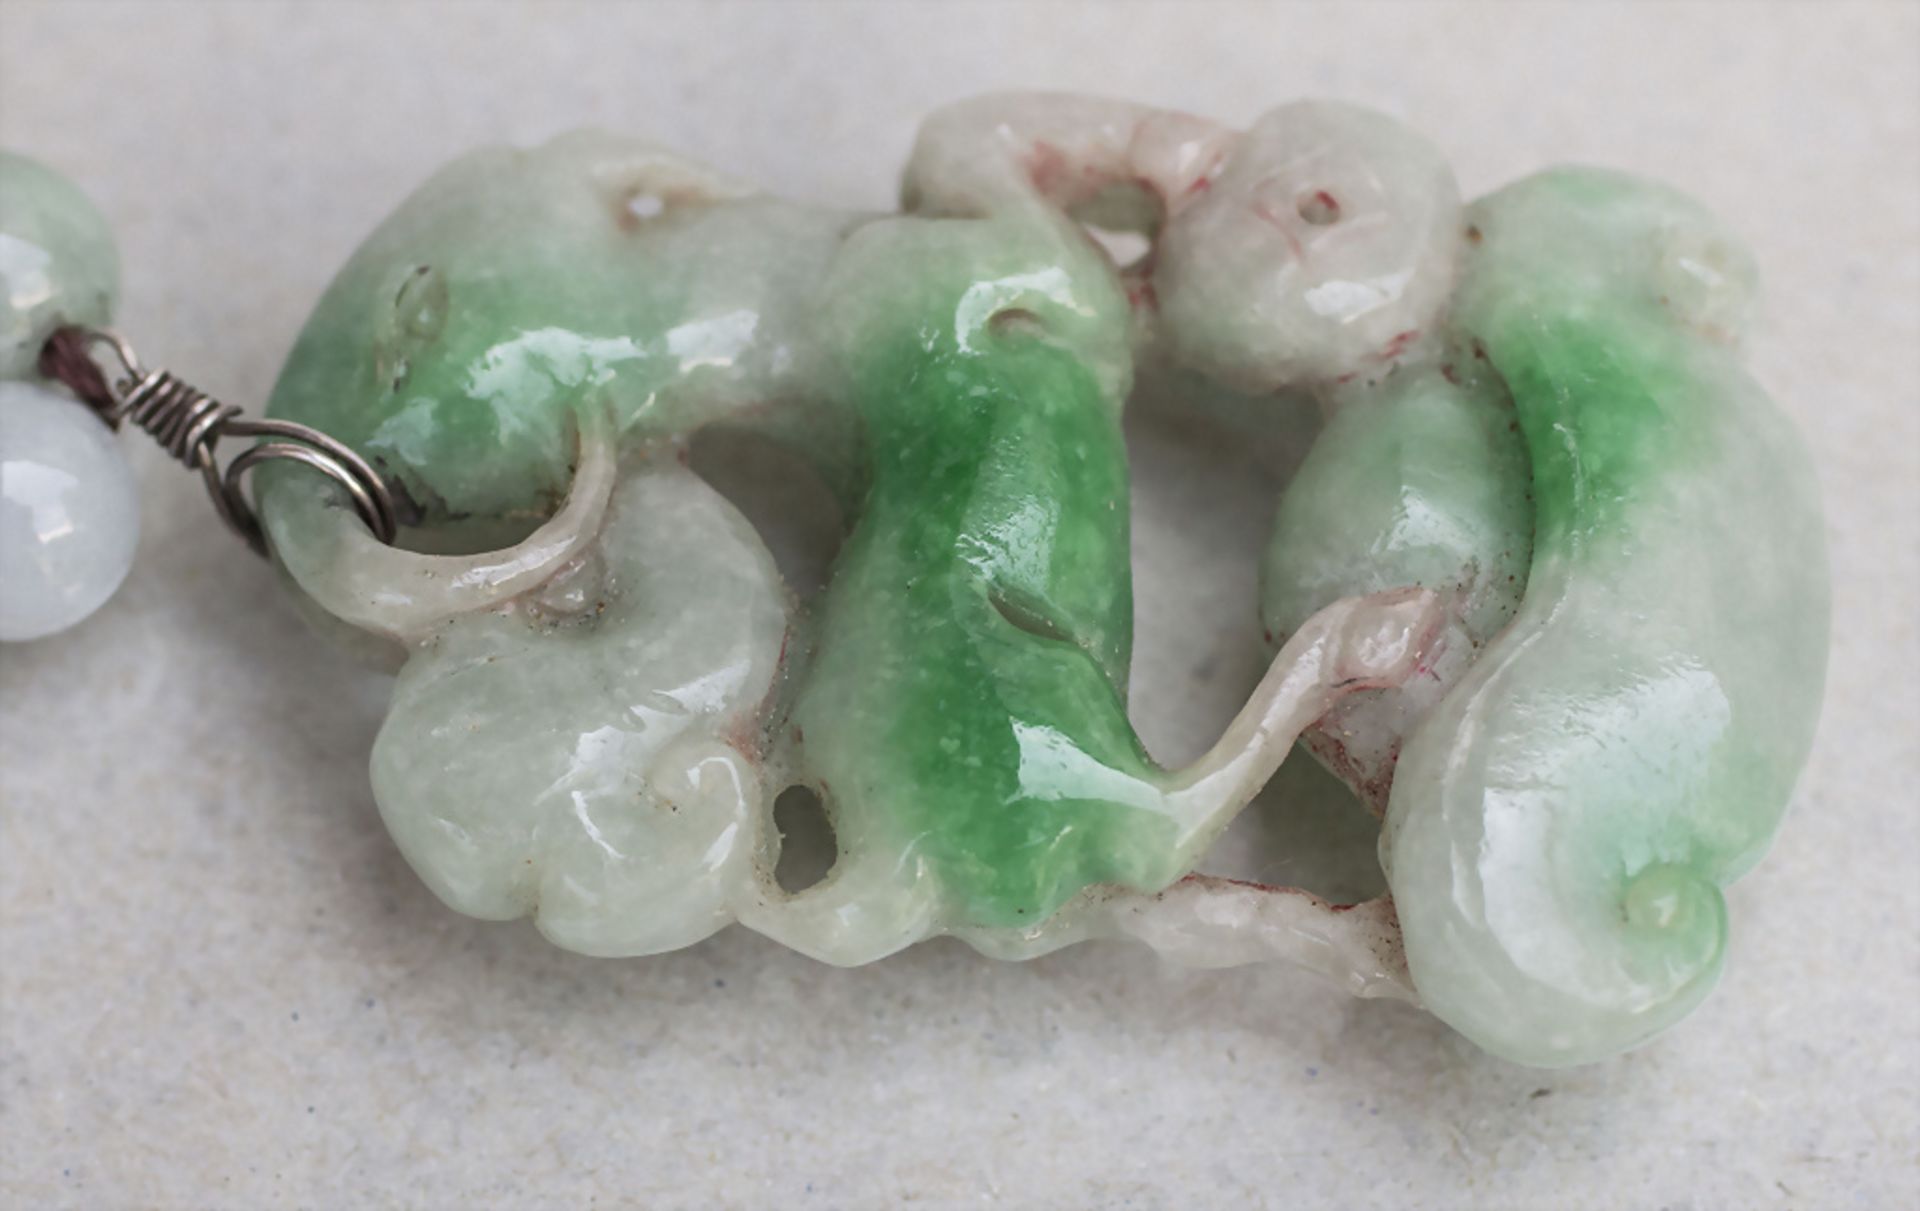 Jadekette mit Glückssymbol / A jade necklace with a lucky symbol, China, Qing-Dynastie (1644-1911) - Image 6 of 10